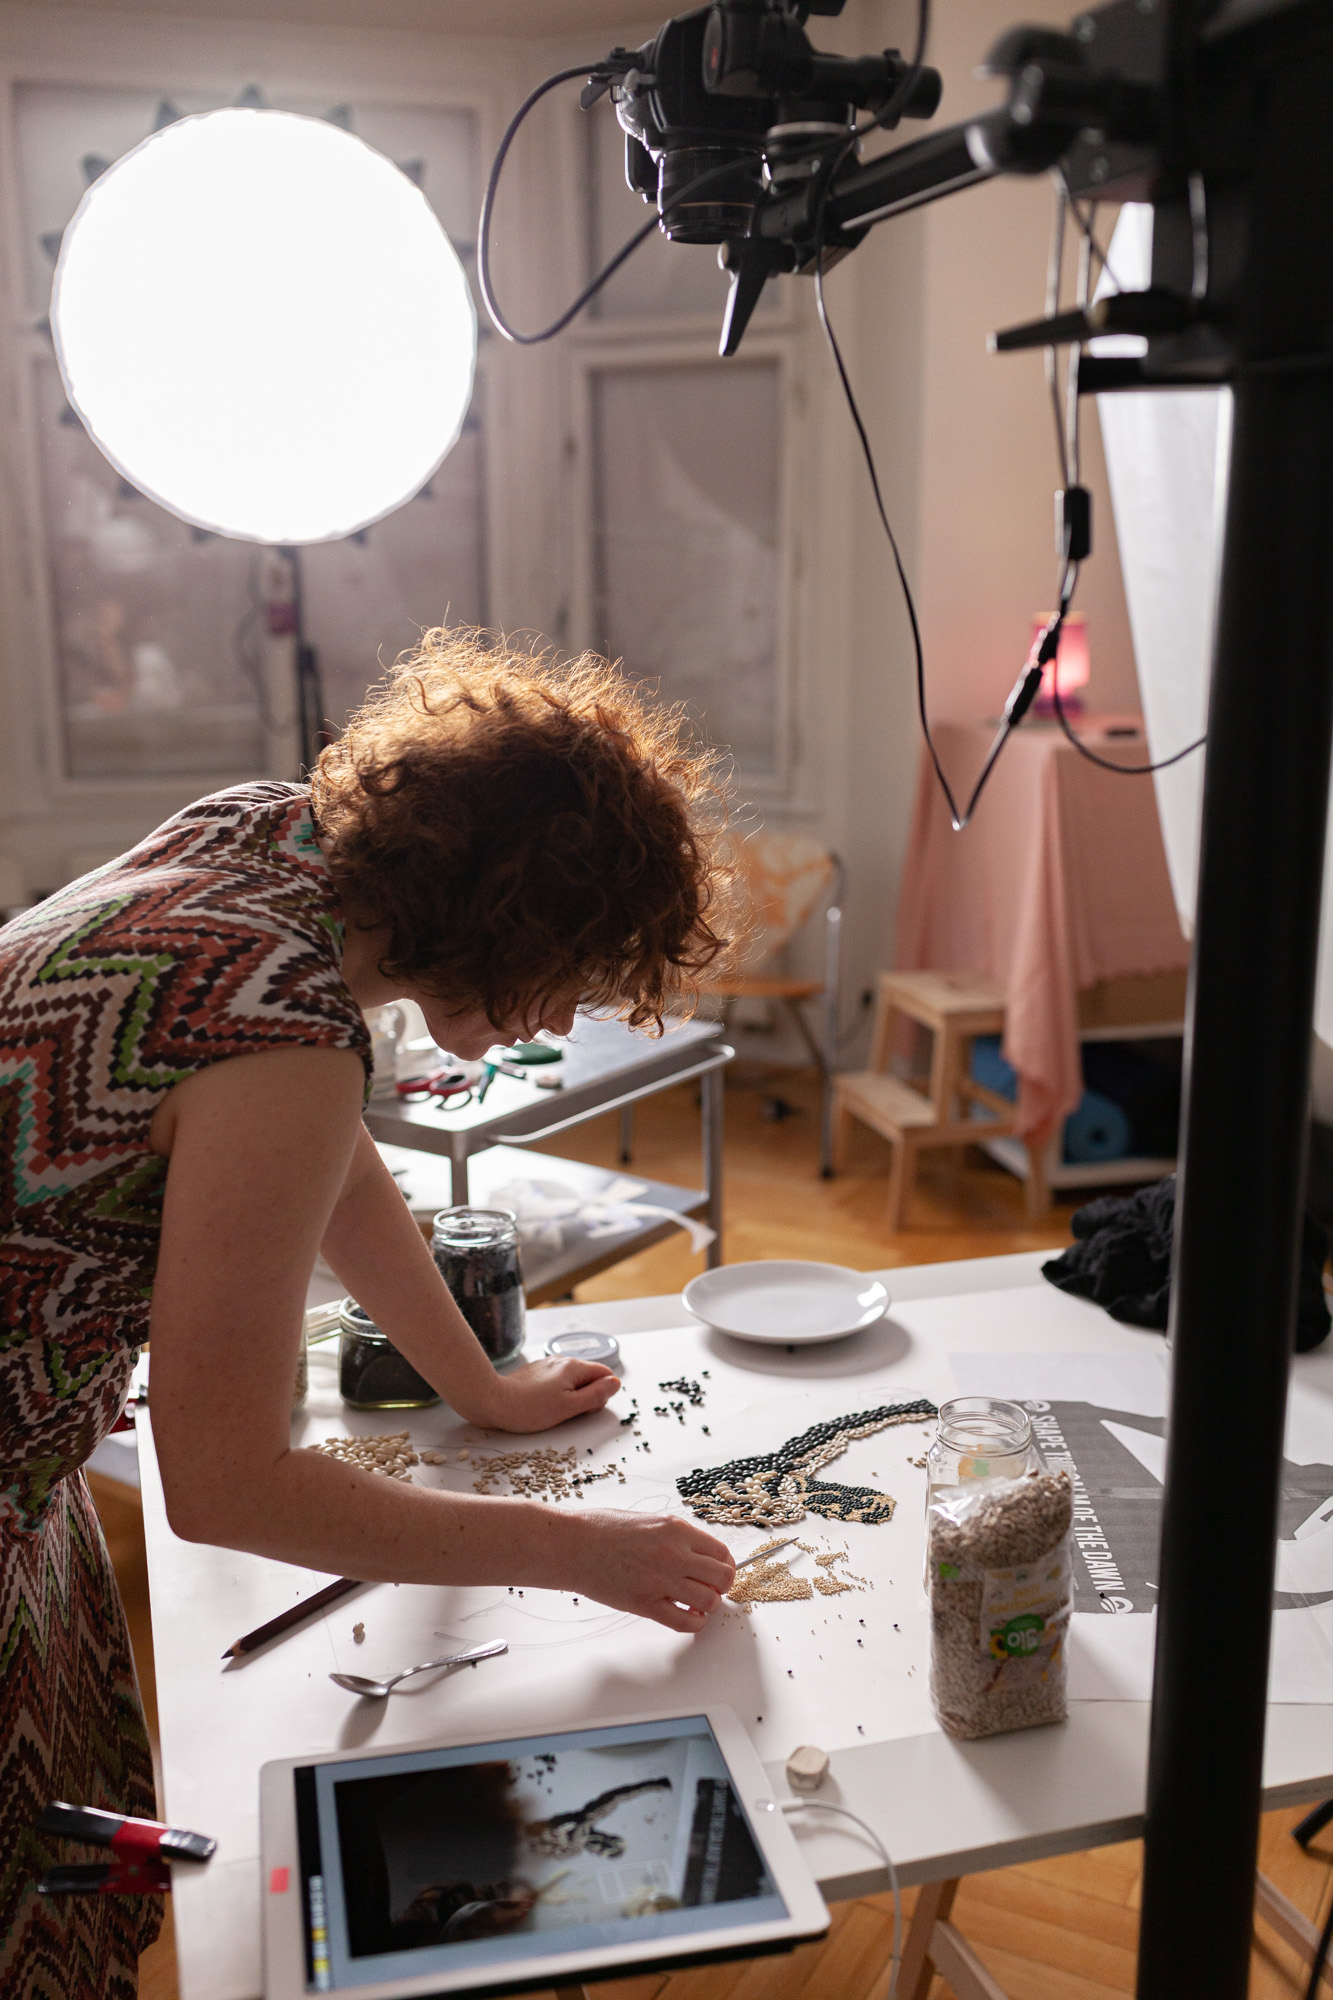 Behind the scenes photo of the vegan propaganda production. A photo studio is shown with a food stylist laying out several seeds, peas and legumes to form the stilyzed image of a man. 